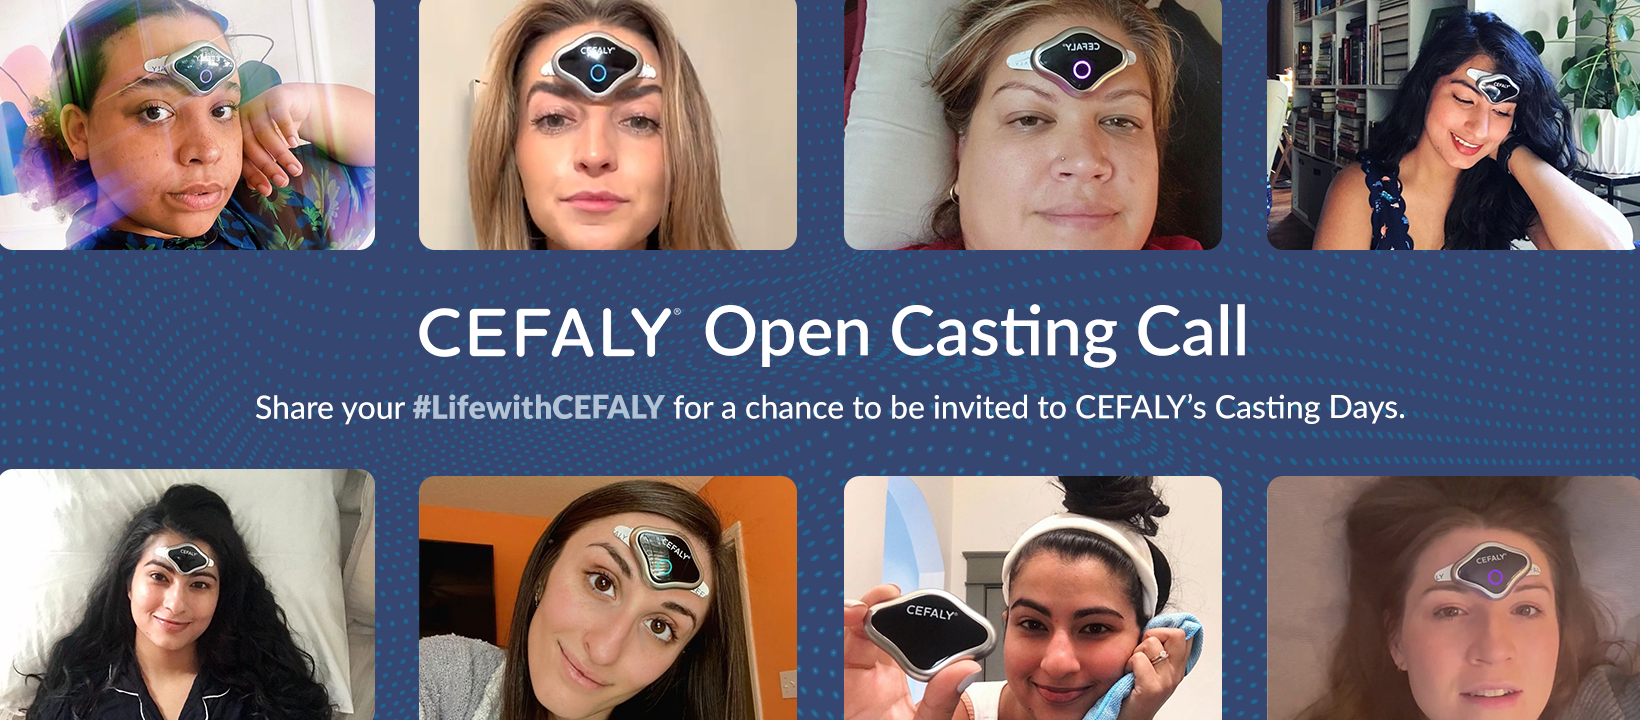 Share Your Life With CEFALY